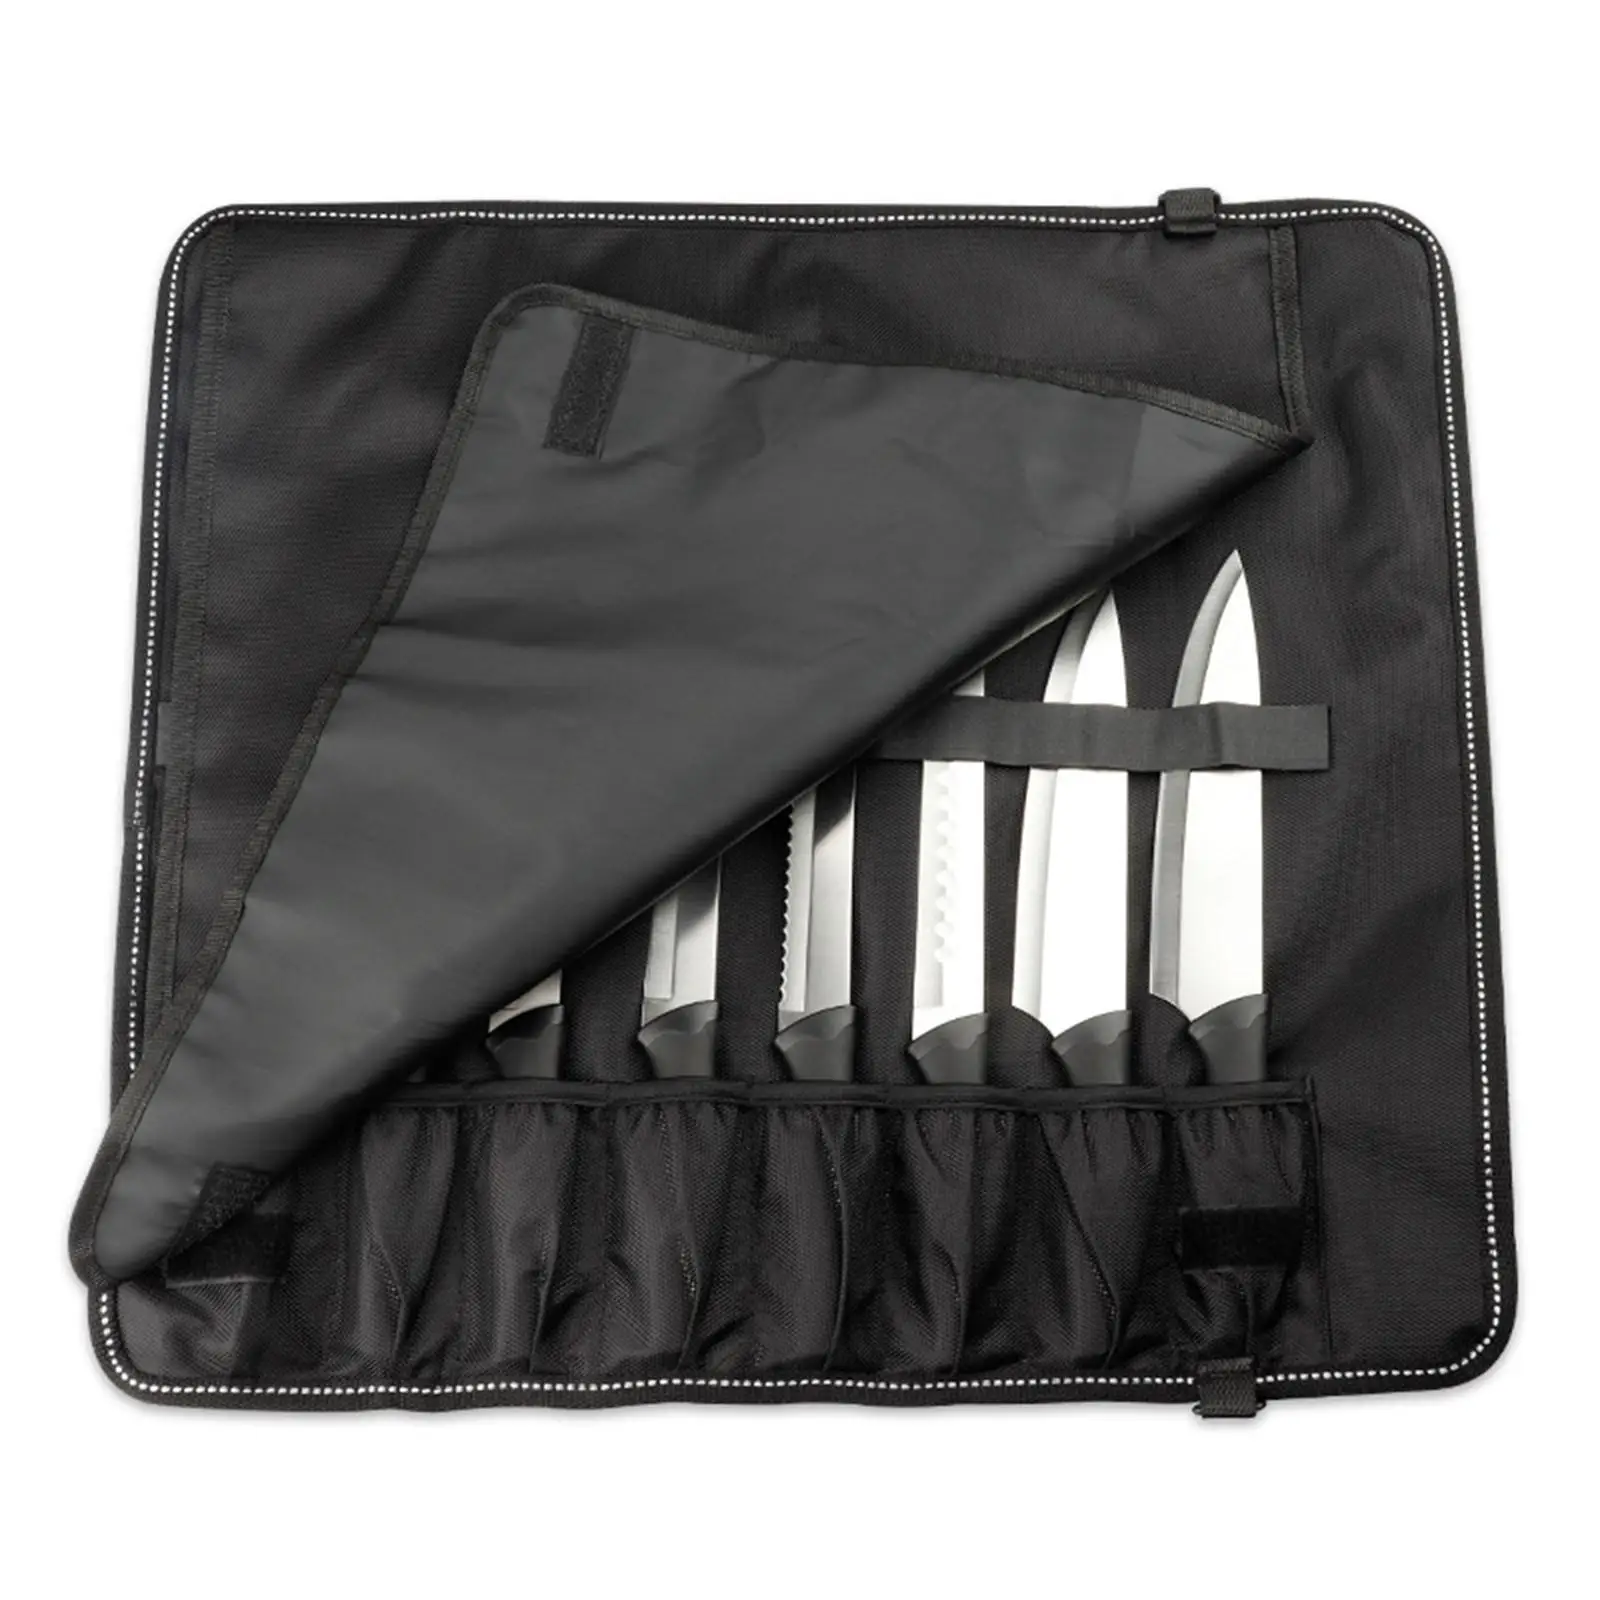 Chef Knives Roll Bag Adjustable Strap Portable Handle Knives Wrap Wallet Organizer Bag for Kitchen Home Chinese Western Knives